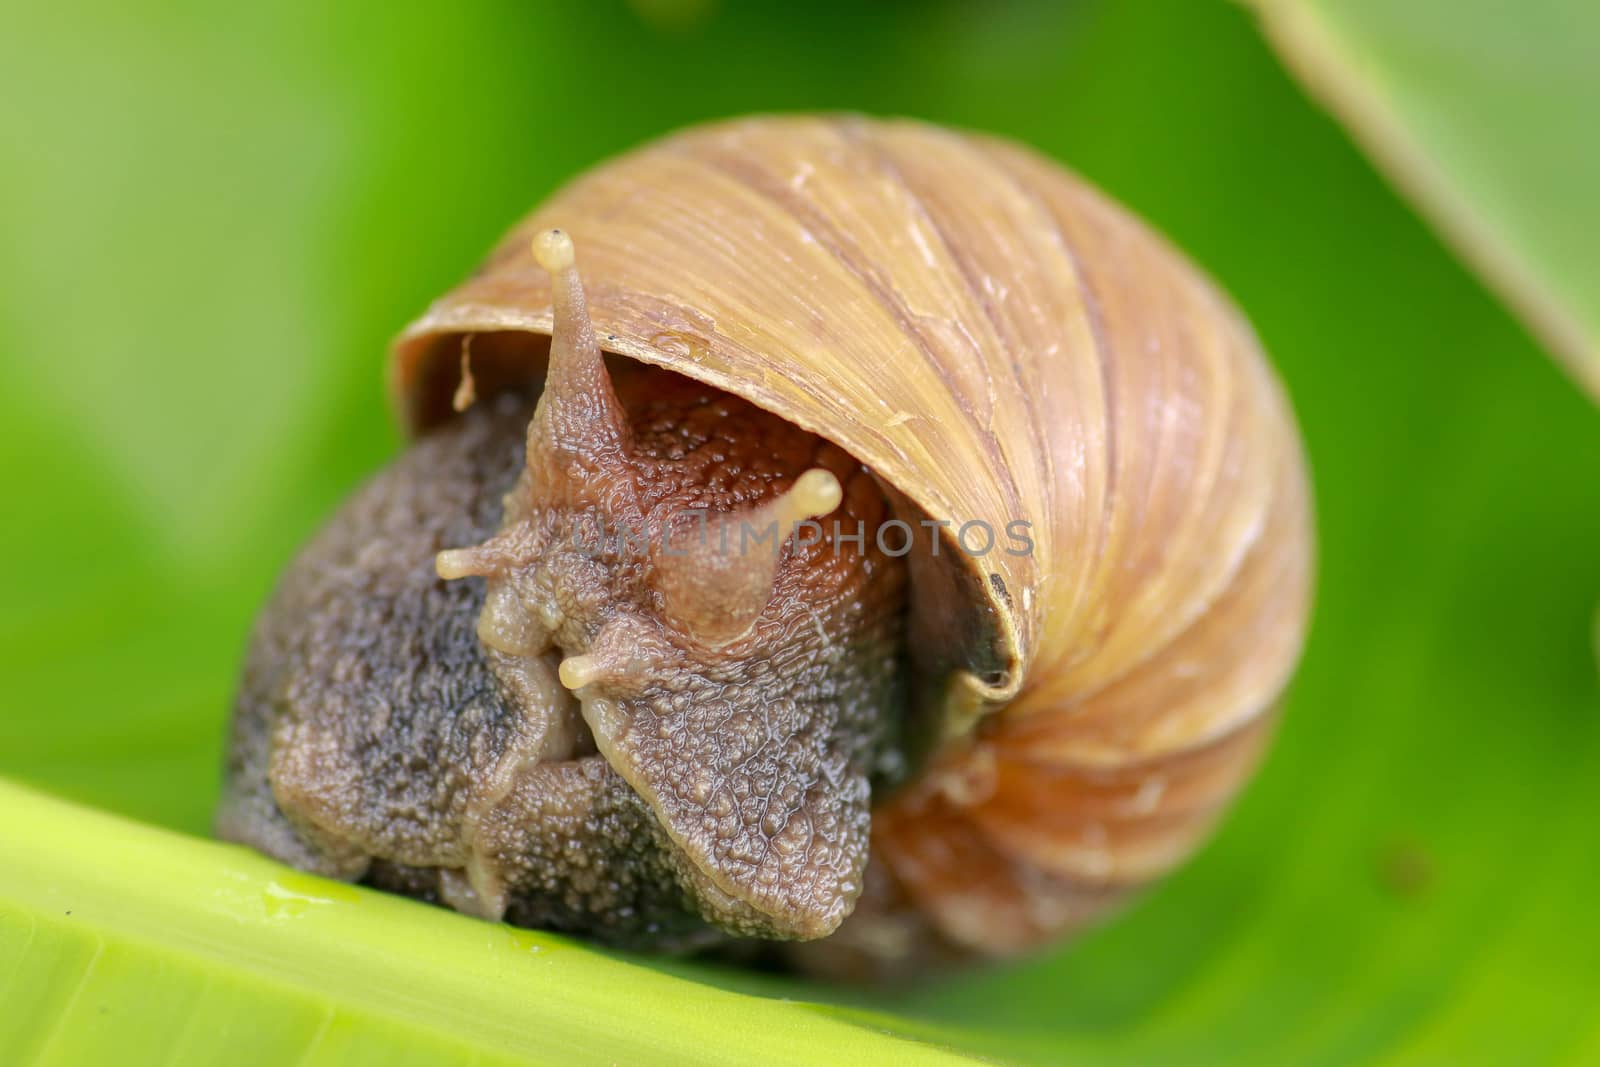 Macro of eye snail. Achatina Fulica looks into the camera lens. Close up of a large adult snail crawling on a banana leaf in a tropical rainforest.